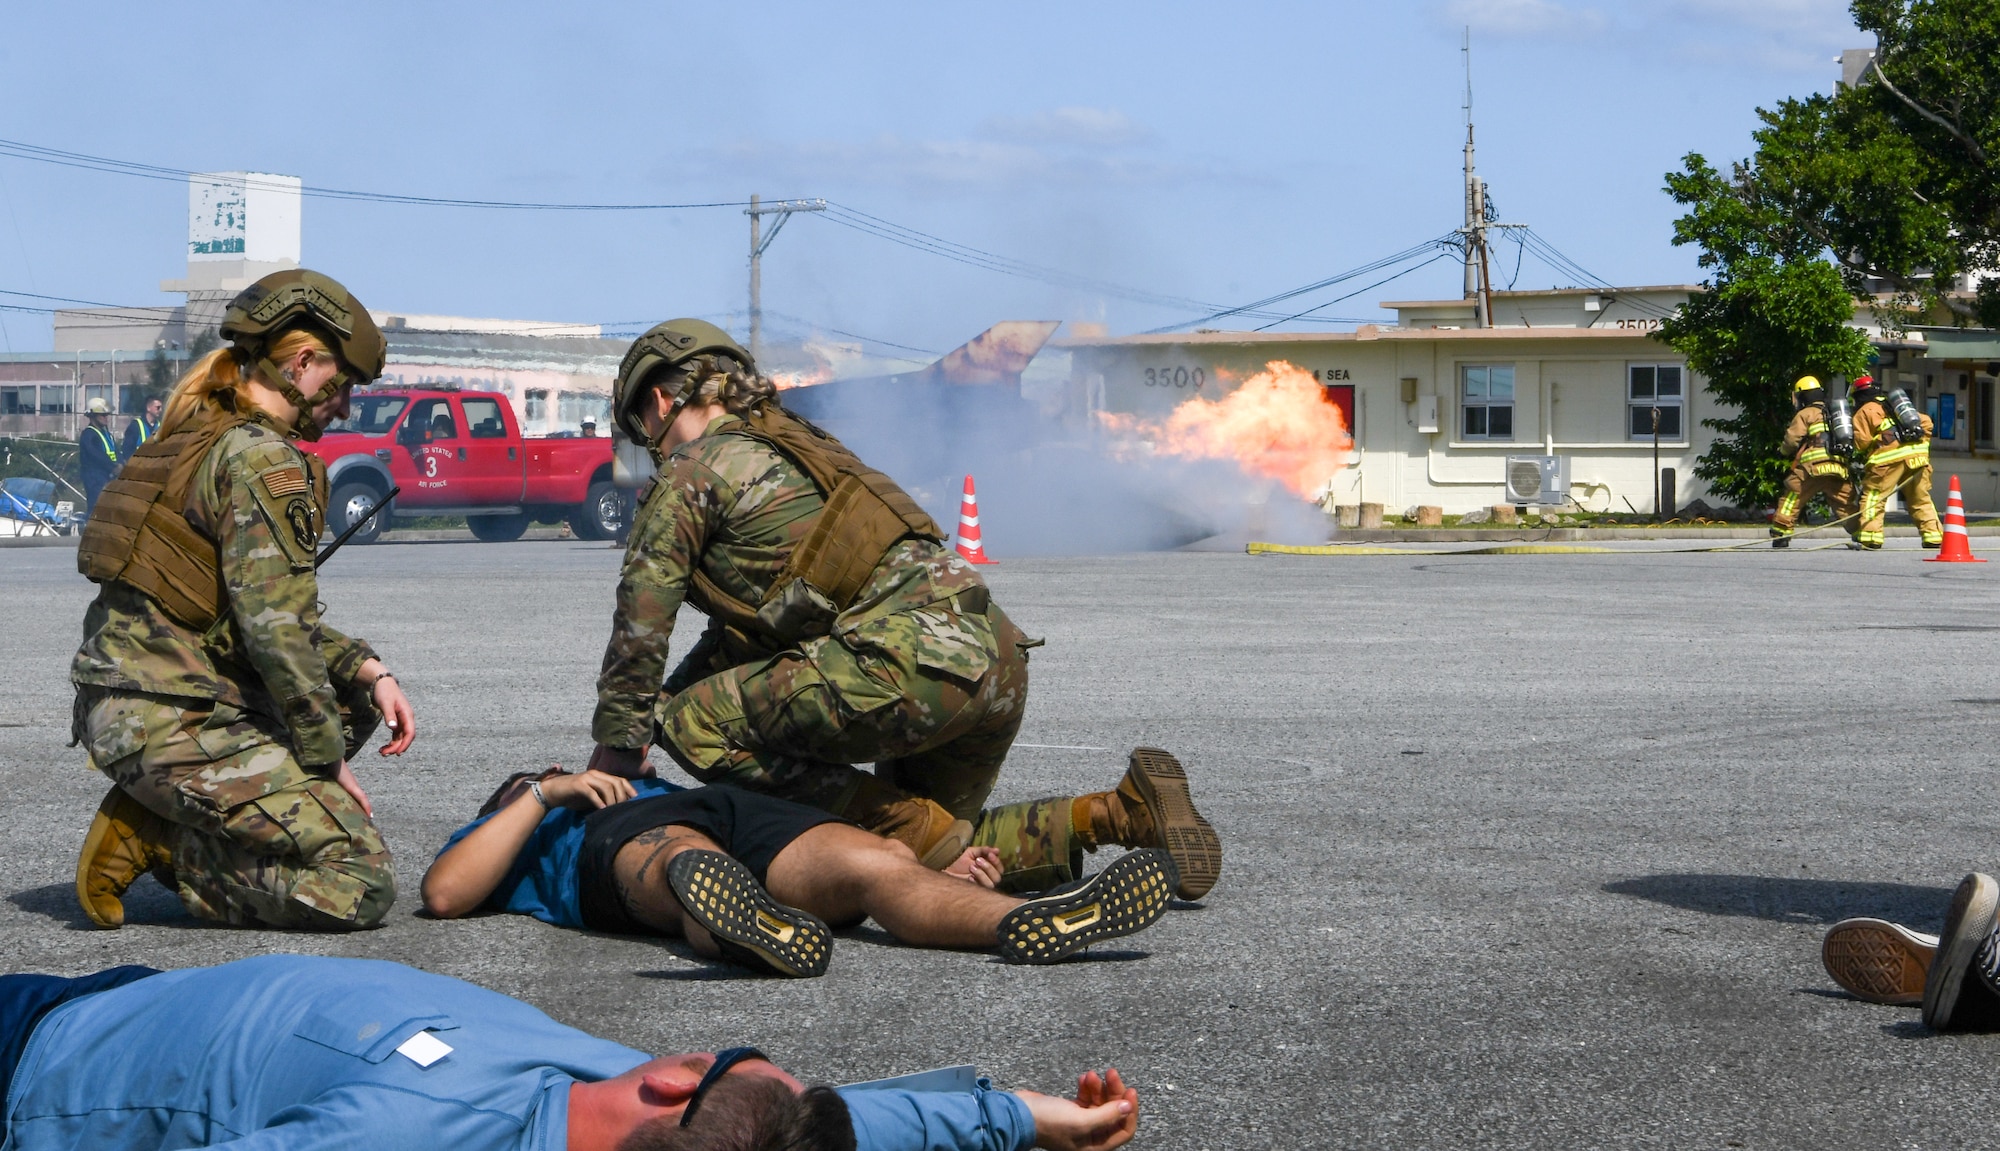 U.S. Air Force Senior Airman Autumn Encinias, left, 18th Security Forces Squadron response force leader, and U.S. Air Force Senior Airman Karleigh Morgan, 18th Security Forces Squadron pass and registration clerk, aid simulated victims while Okinawa emergency responders simulate extinguishing a controlled fire.